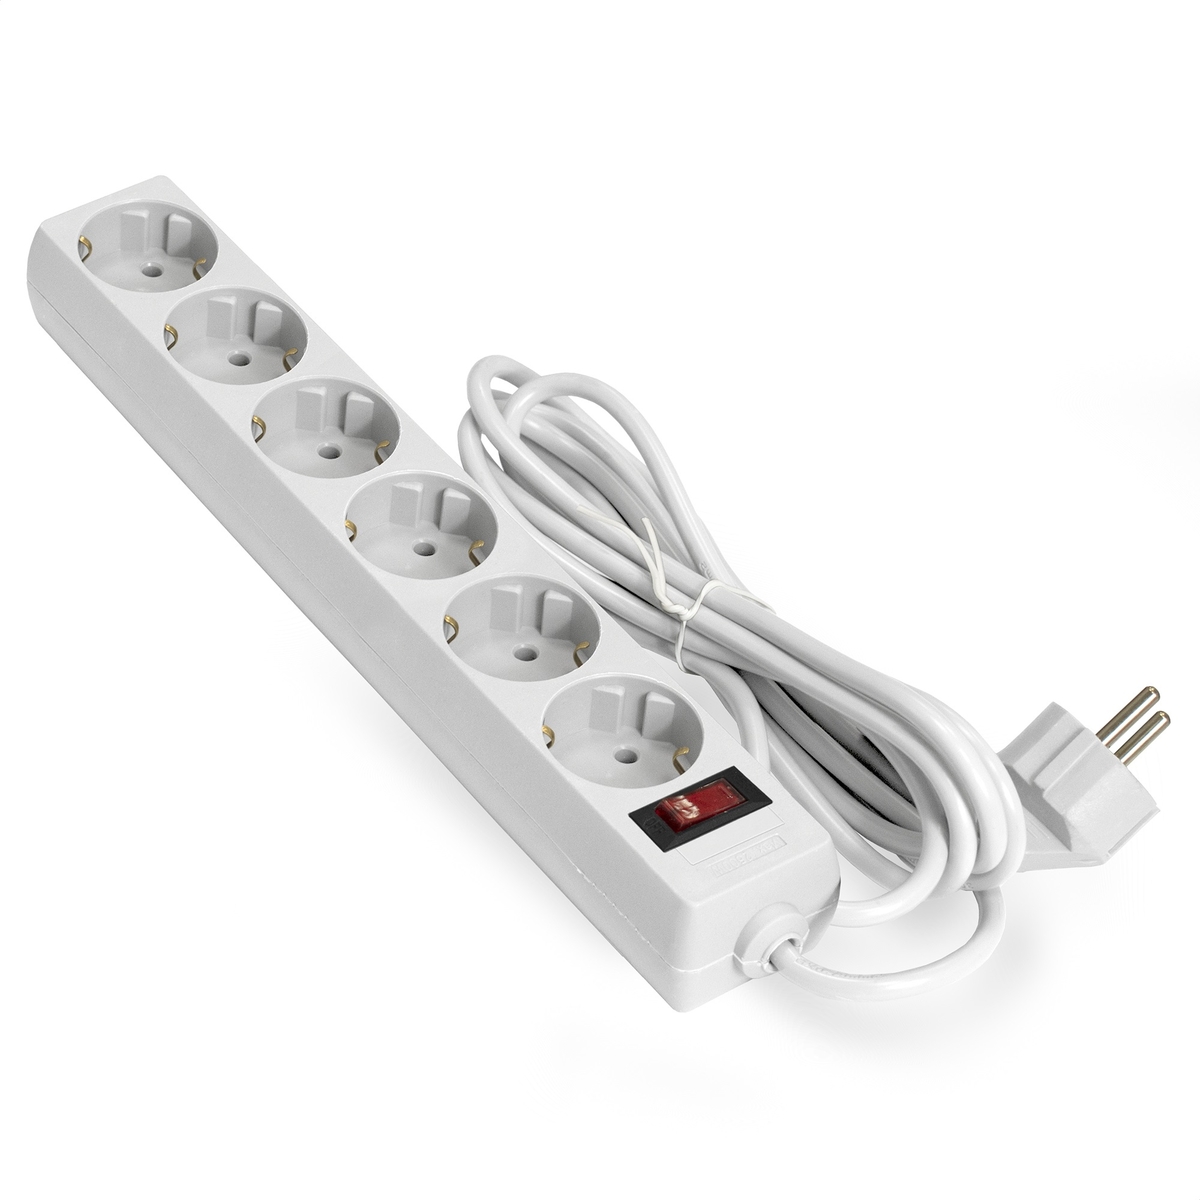 Surge protector ExeGate SP-6-3W